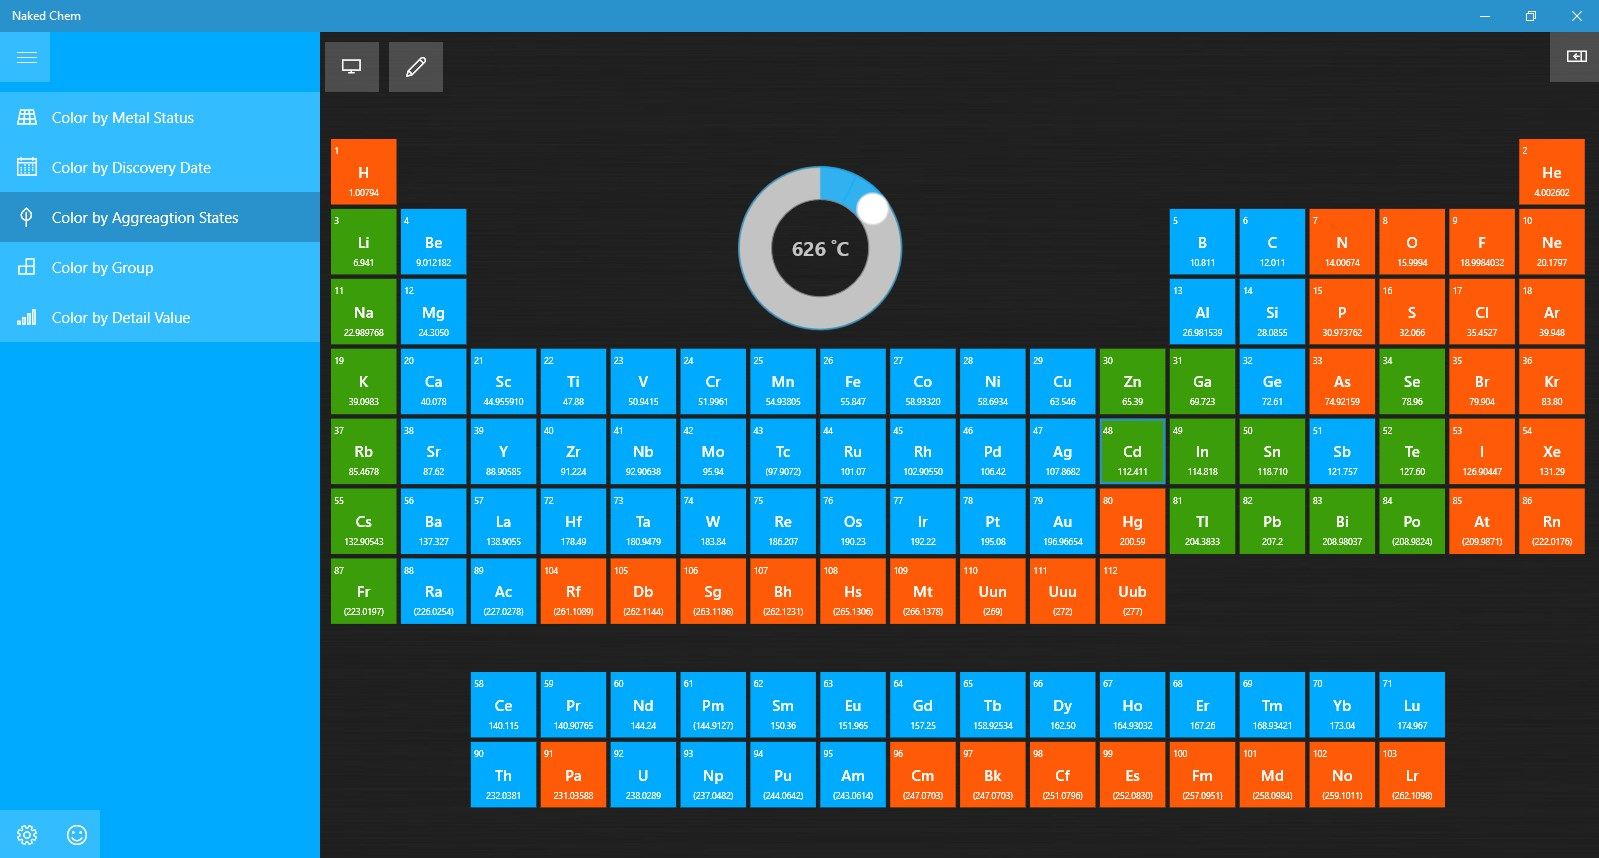 Main Screen - elements are colored according to the aggregation state that they have at 626 degrees Celsius